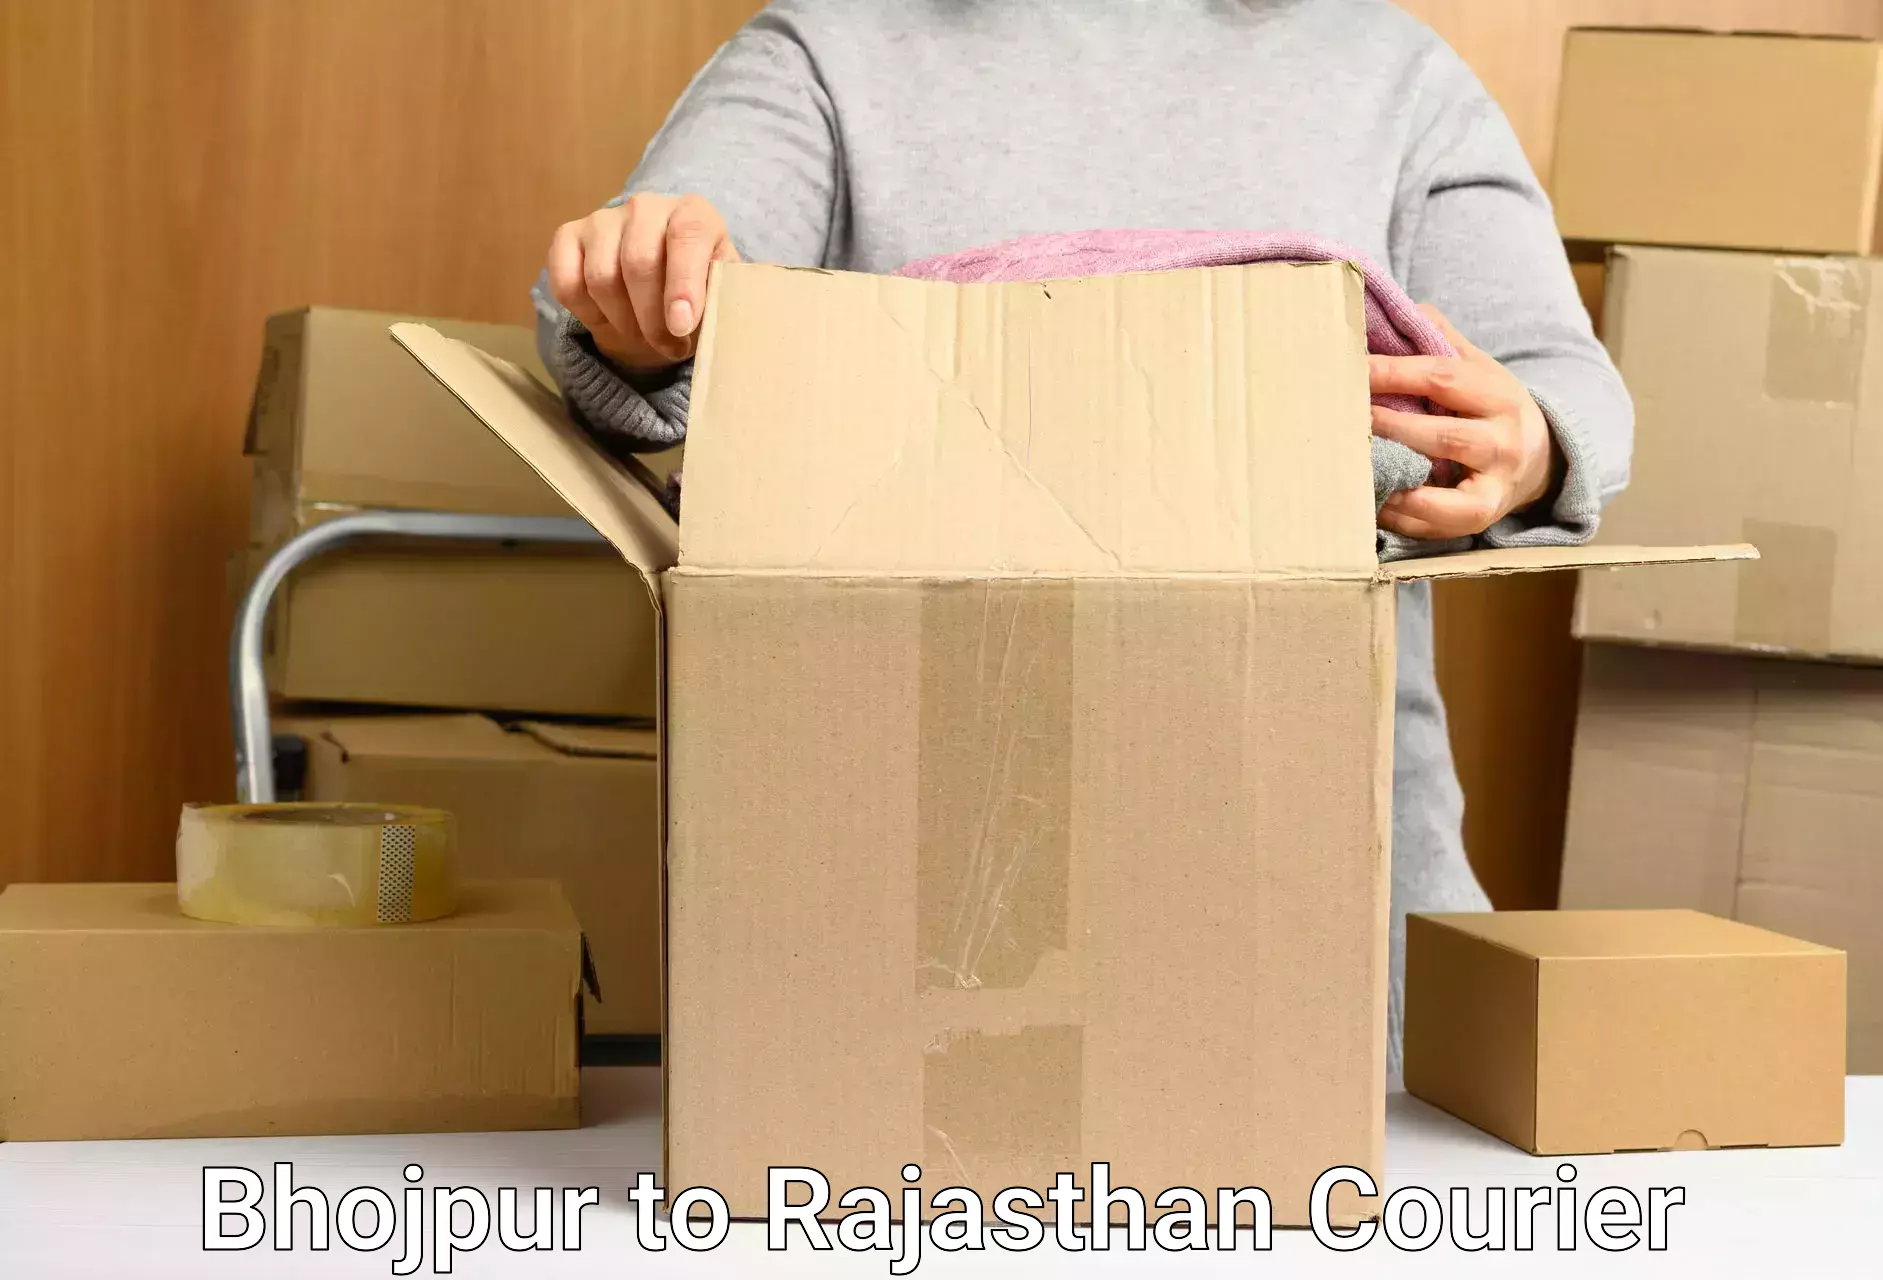 Customer-focused courier Bhojpur to Pilani